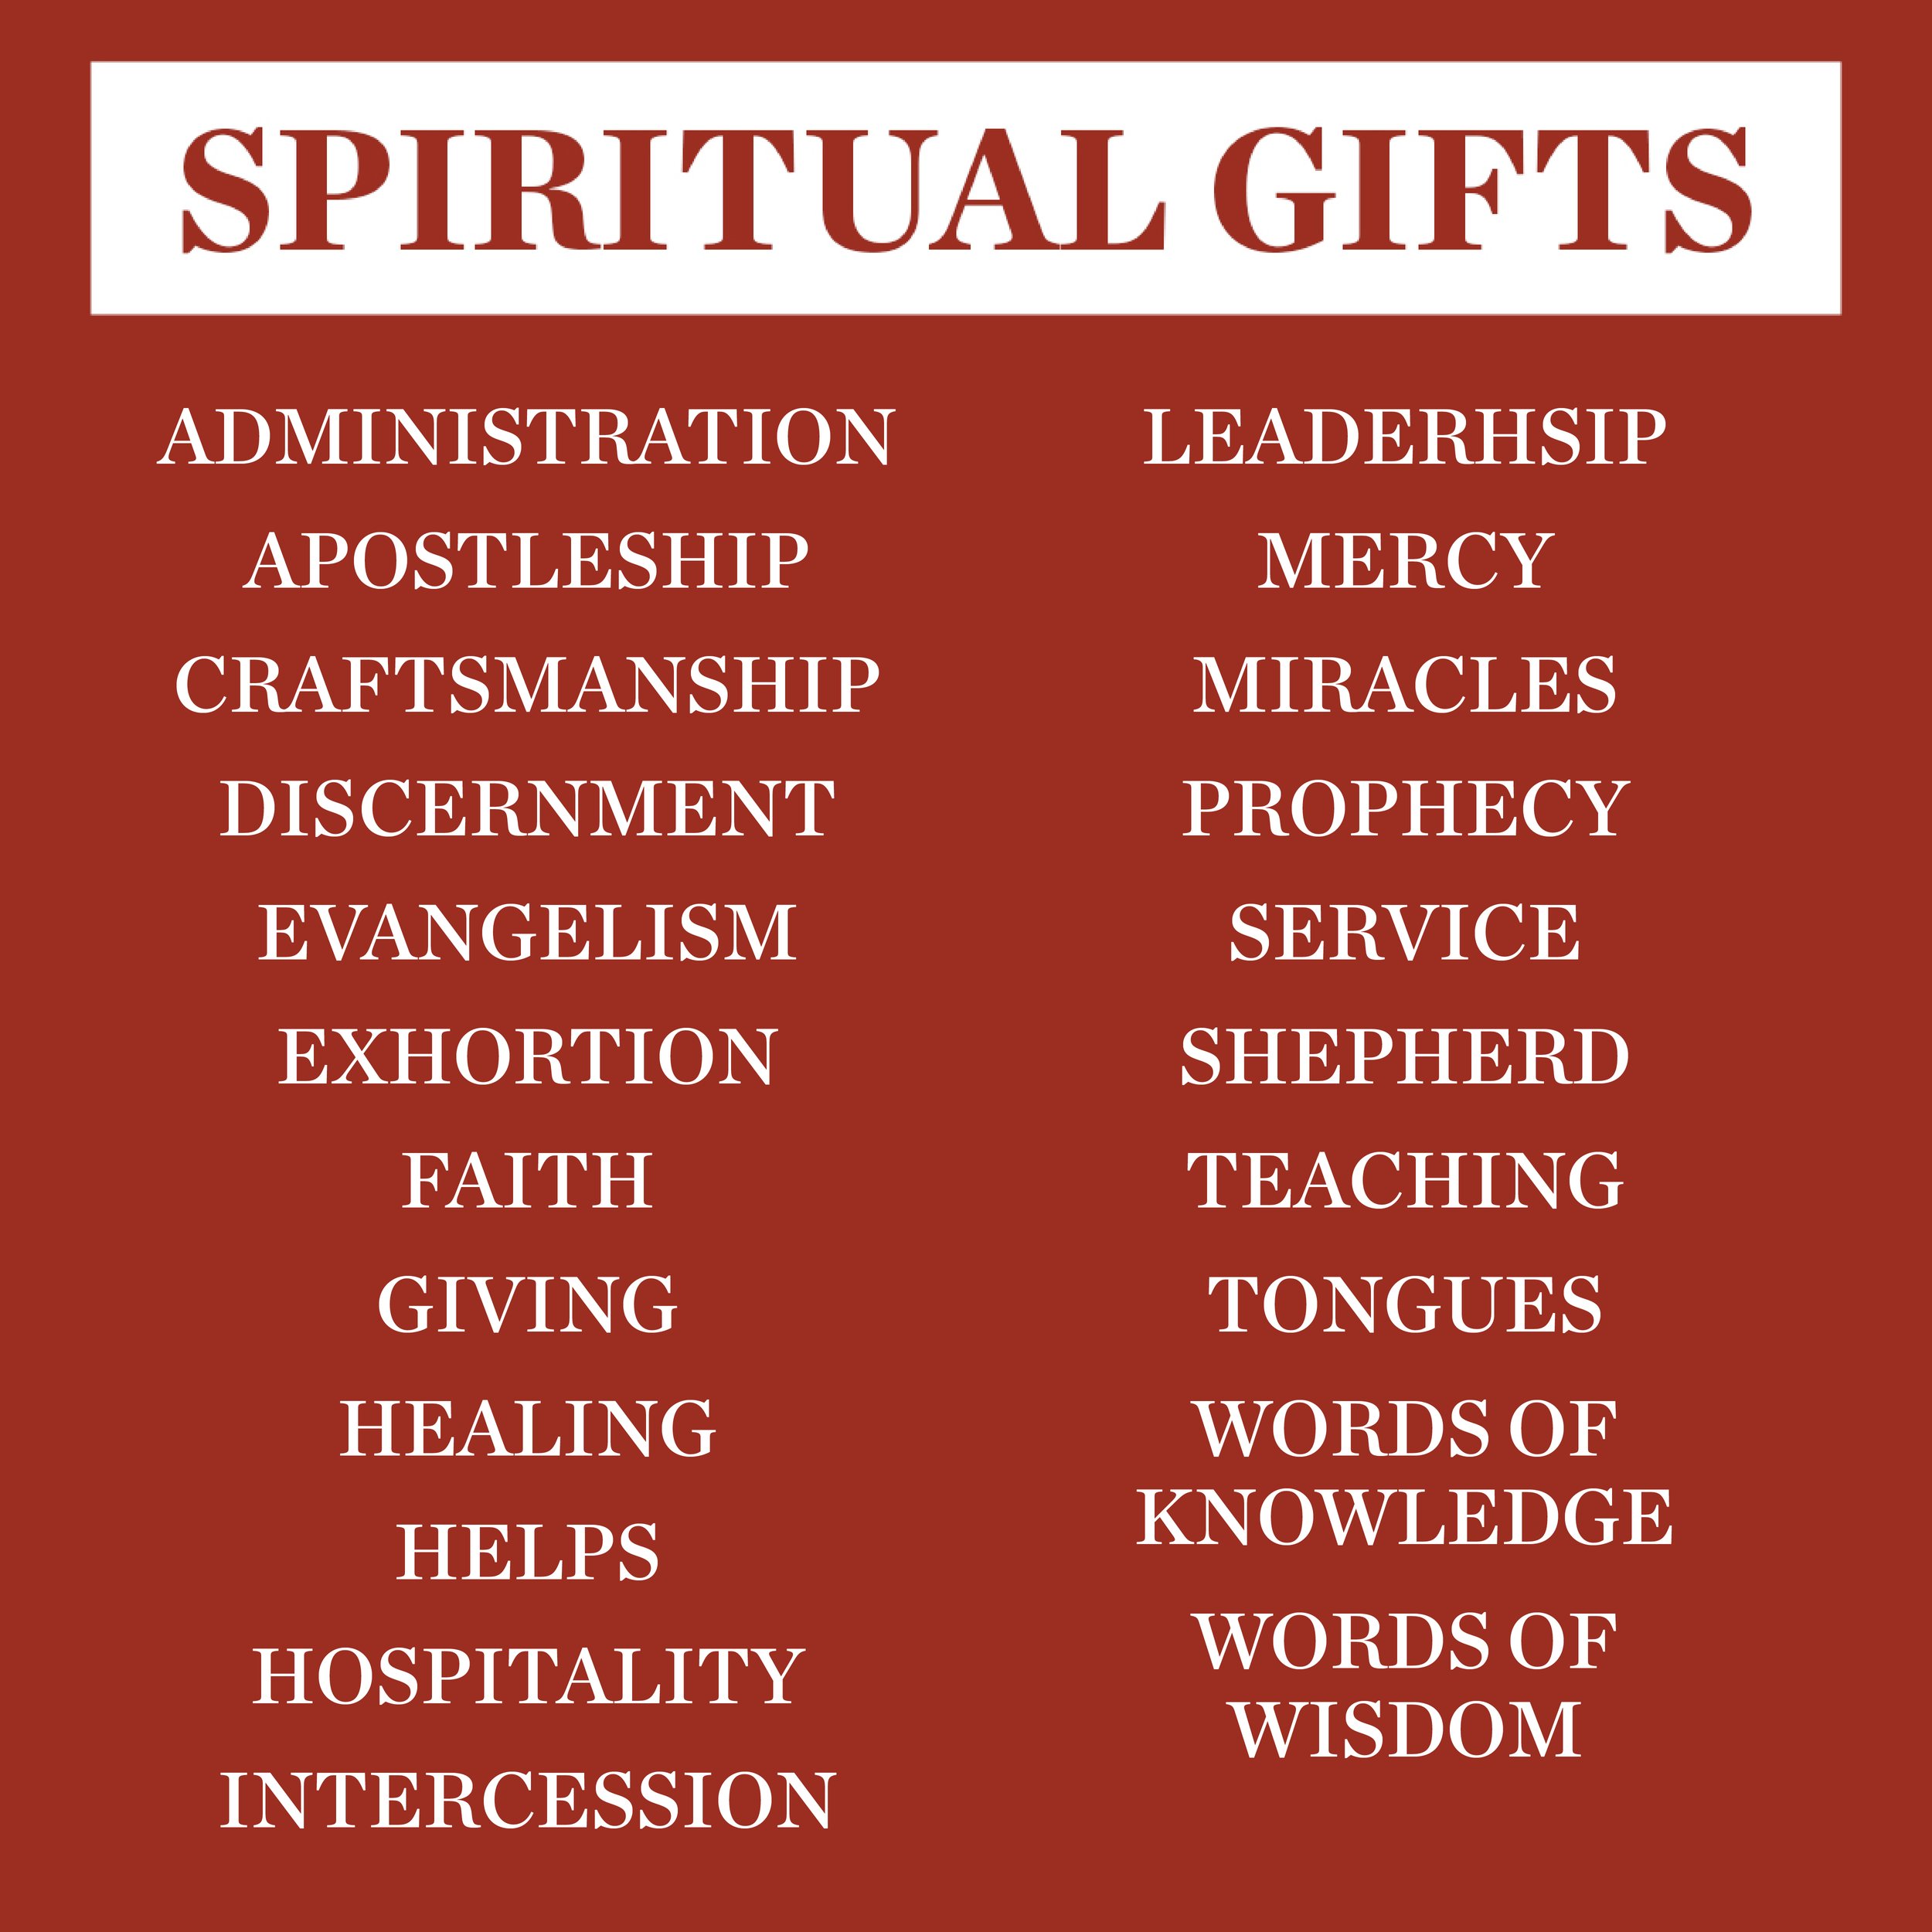 Share more than 51 spiritual gifts for men